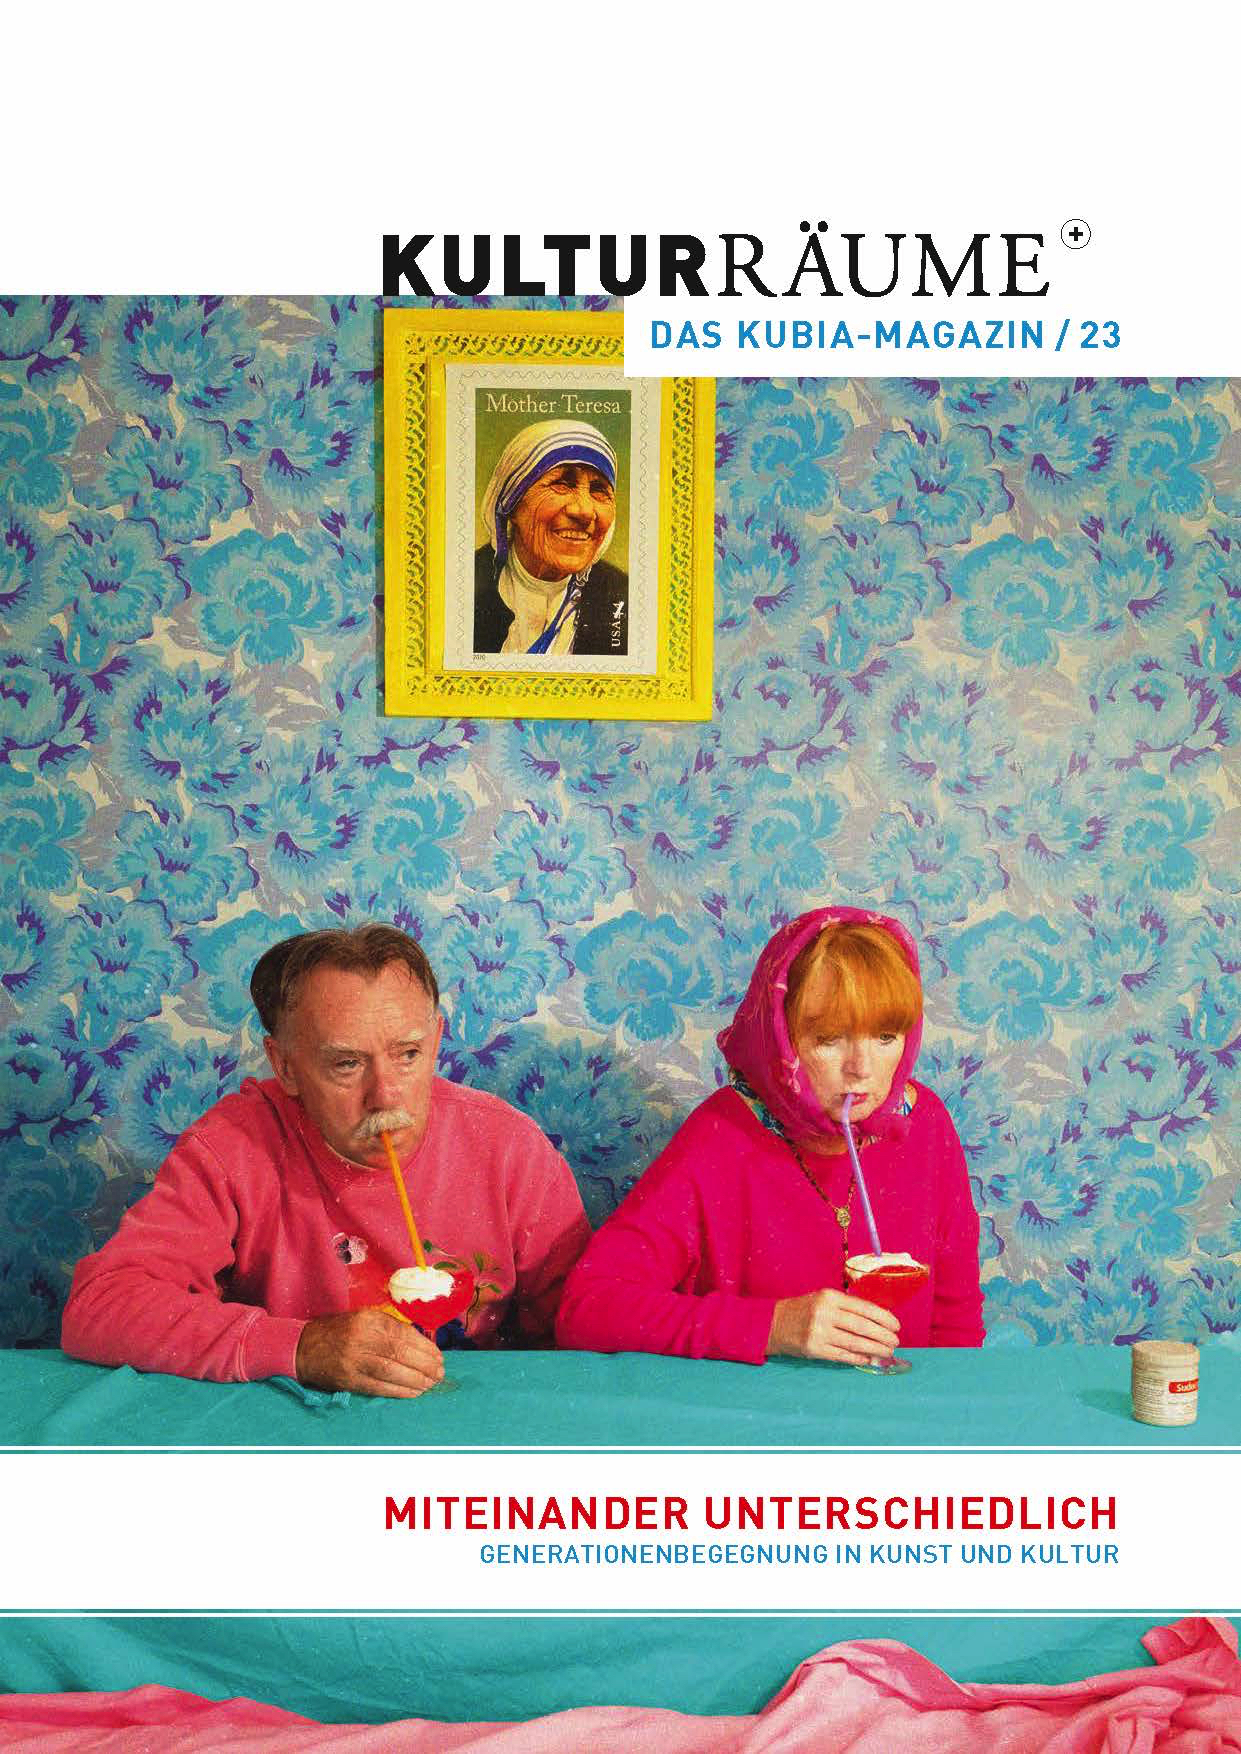 Cover Kulturräume+ 23/2022. photo by Enda Burke from the series "Homebound with my parents". a man and a woman in pink sit at a table drinking pink cocktails from straws. background turquoise patterned wallpaper.